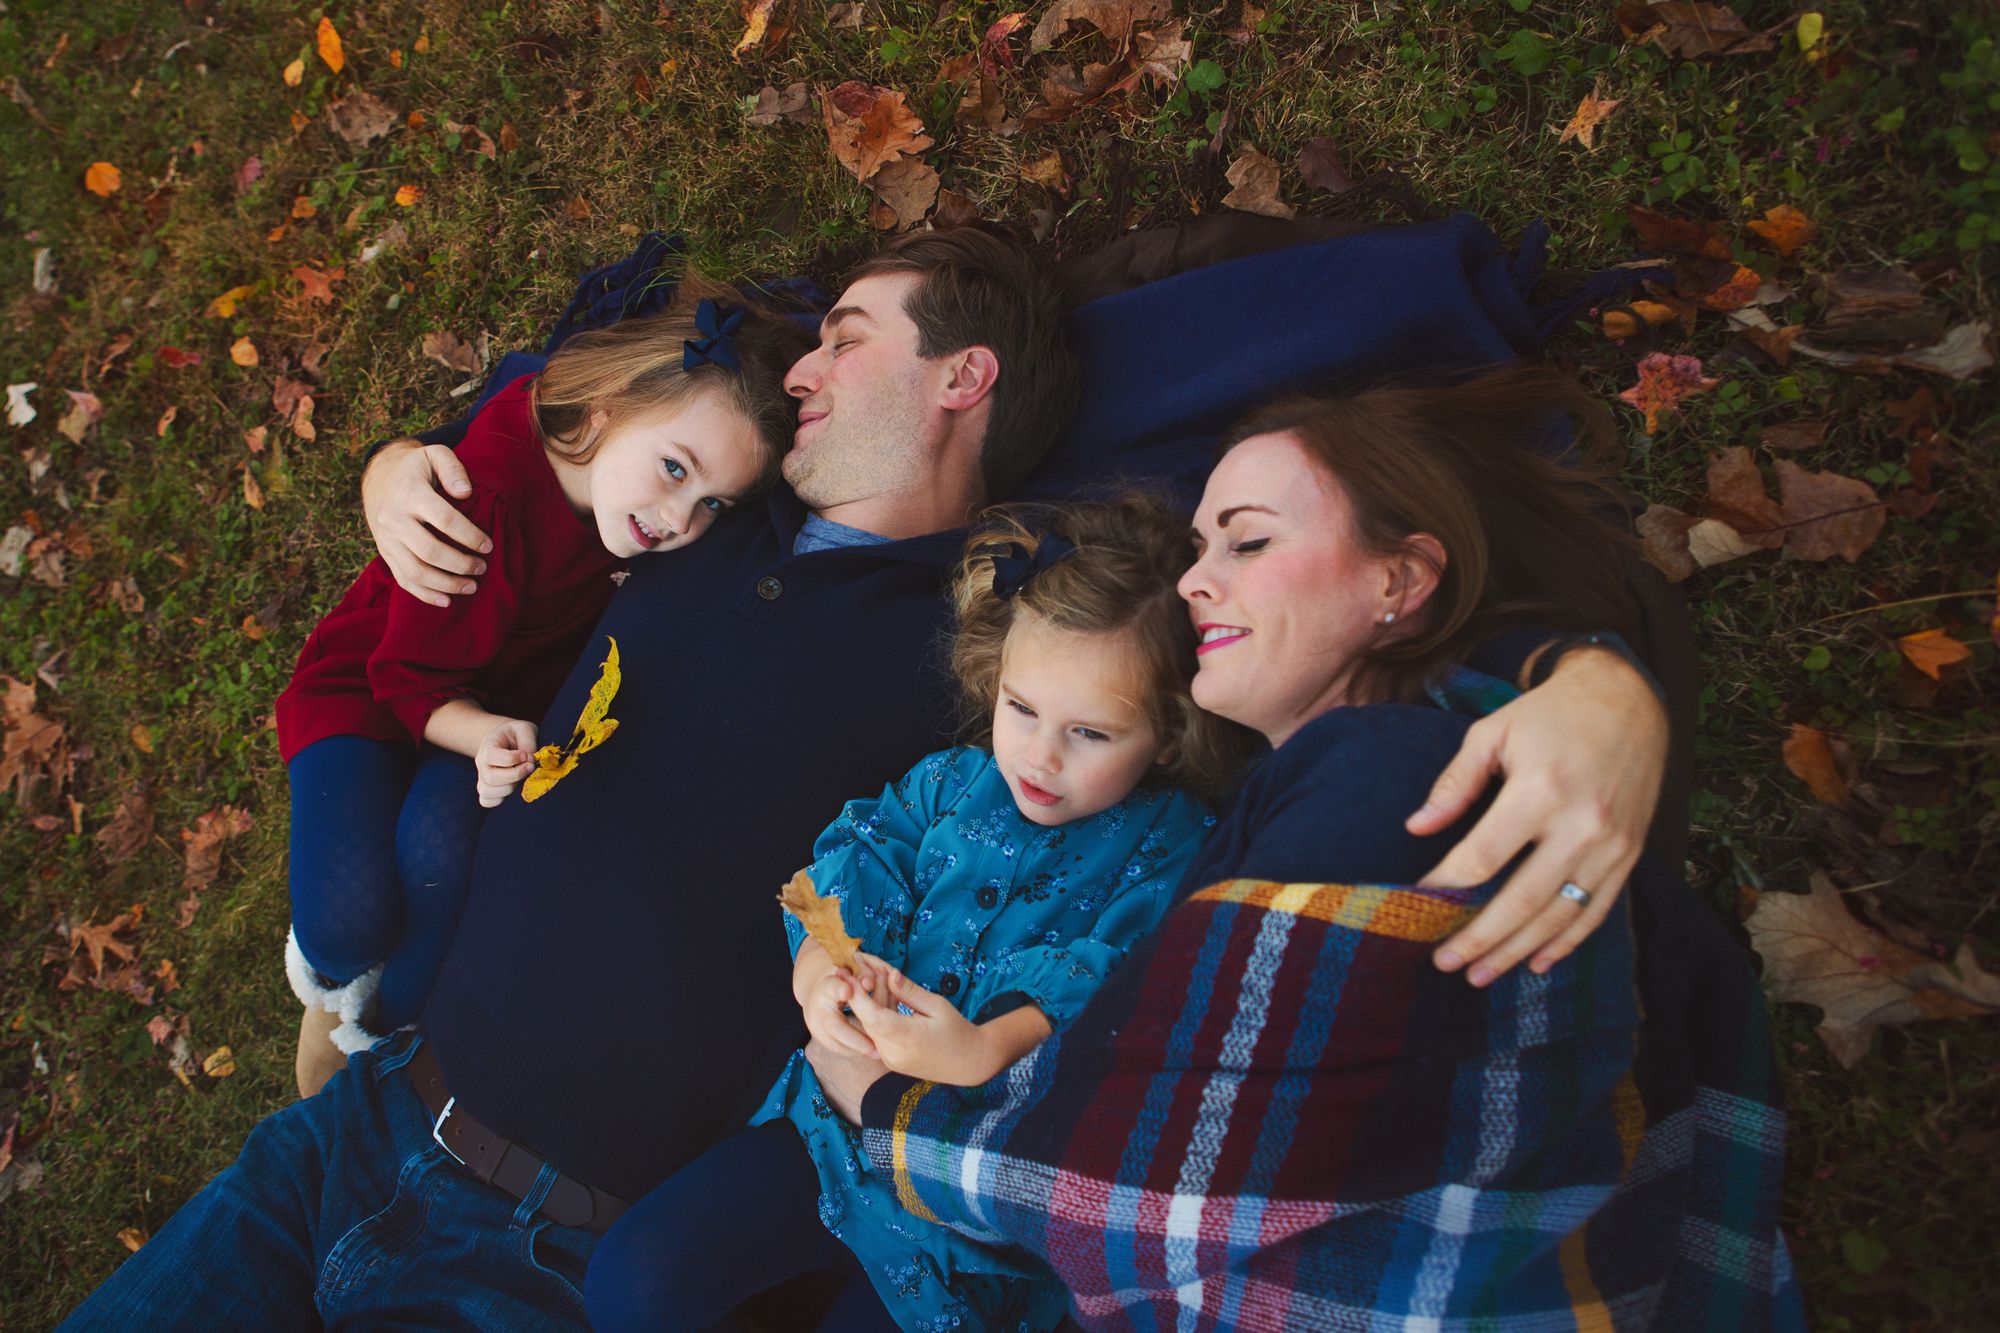 Family portrait on grass during outdoor photo shoot